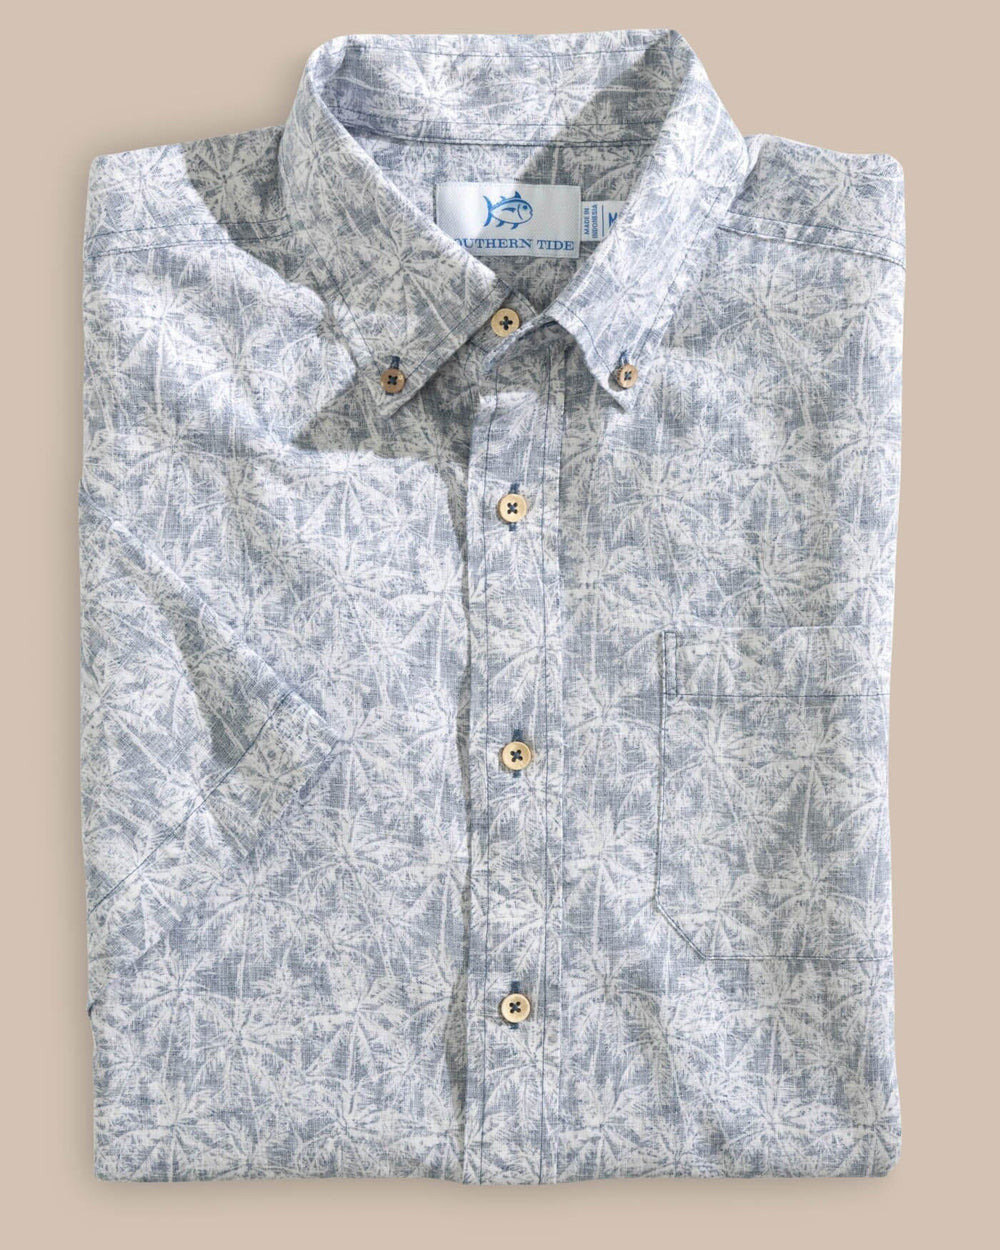 The folded view of the Southern Tide Linen Rayon Keep Palm and Carry On Print Sport Shirt by Southern Tide - Aged Denim